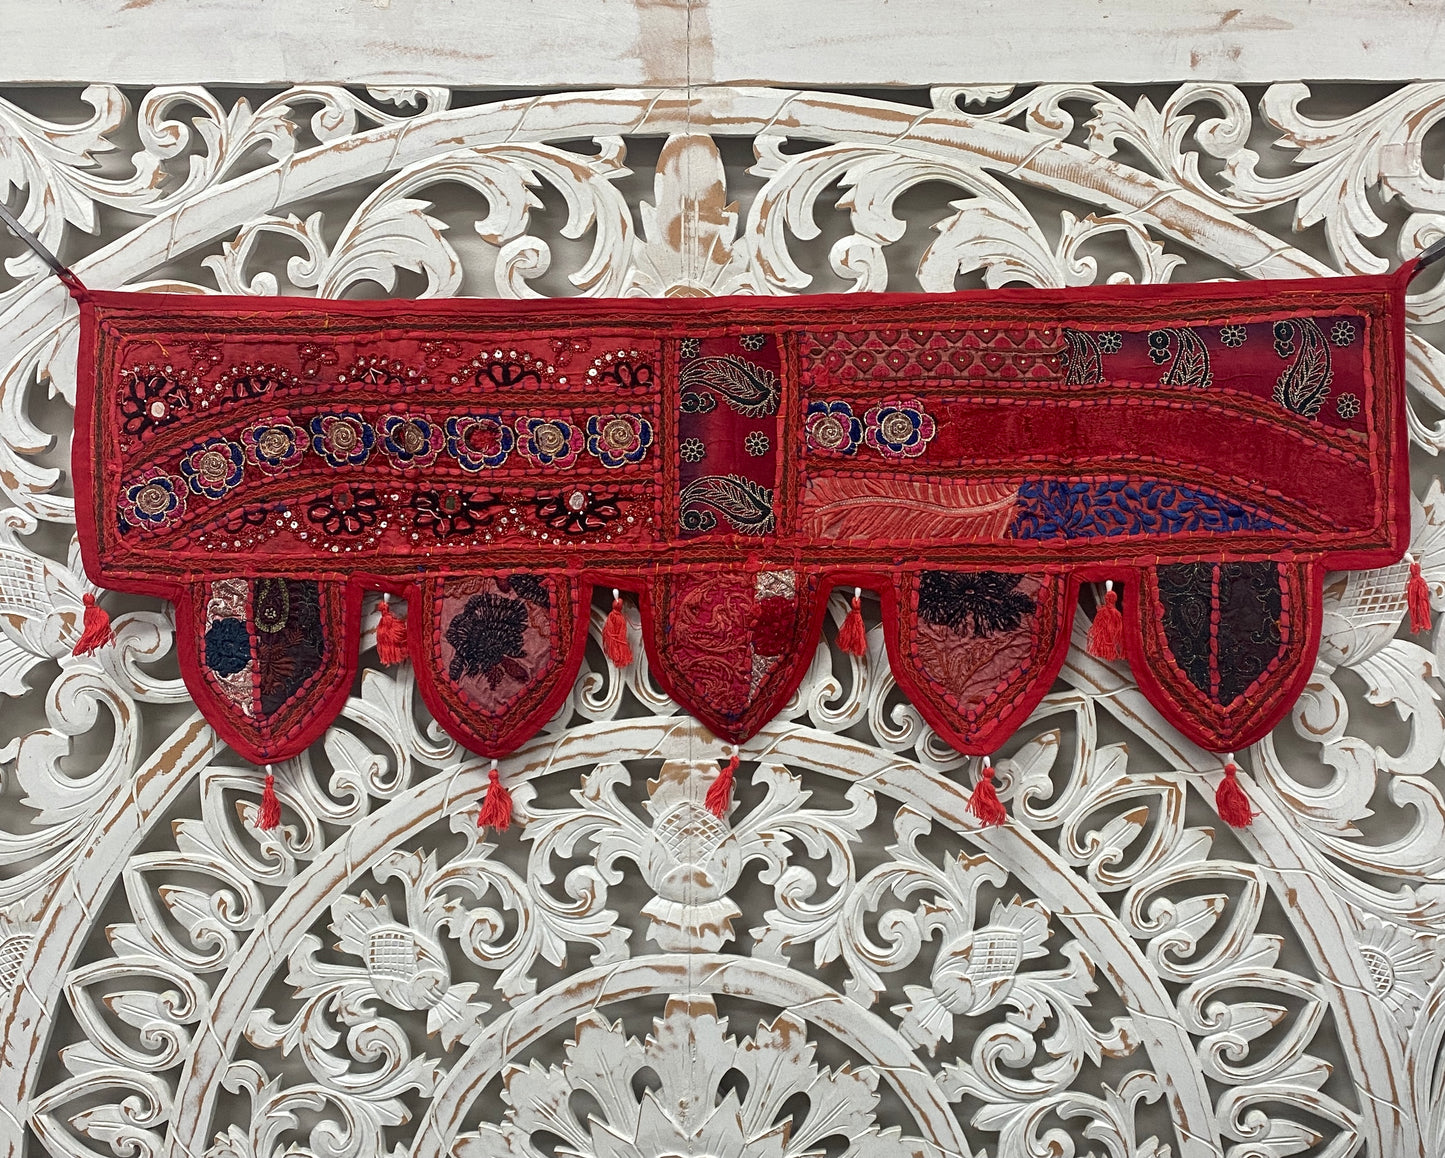 Rajasthani Embroidered Toran Door or Window Hangings - Available in 9 Colors